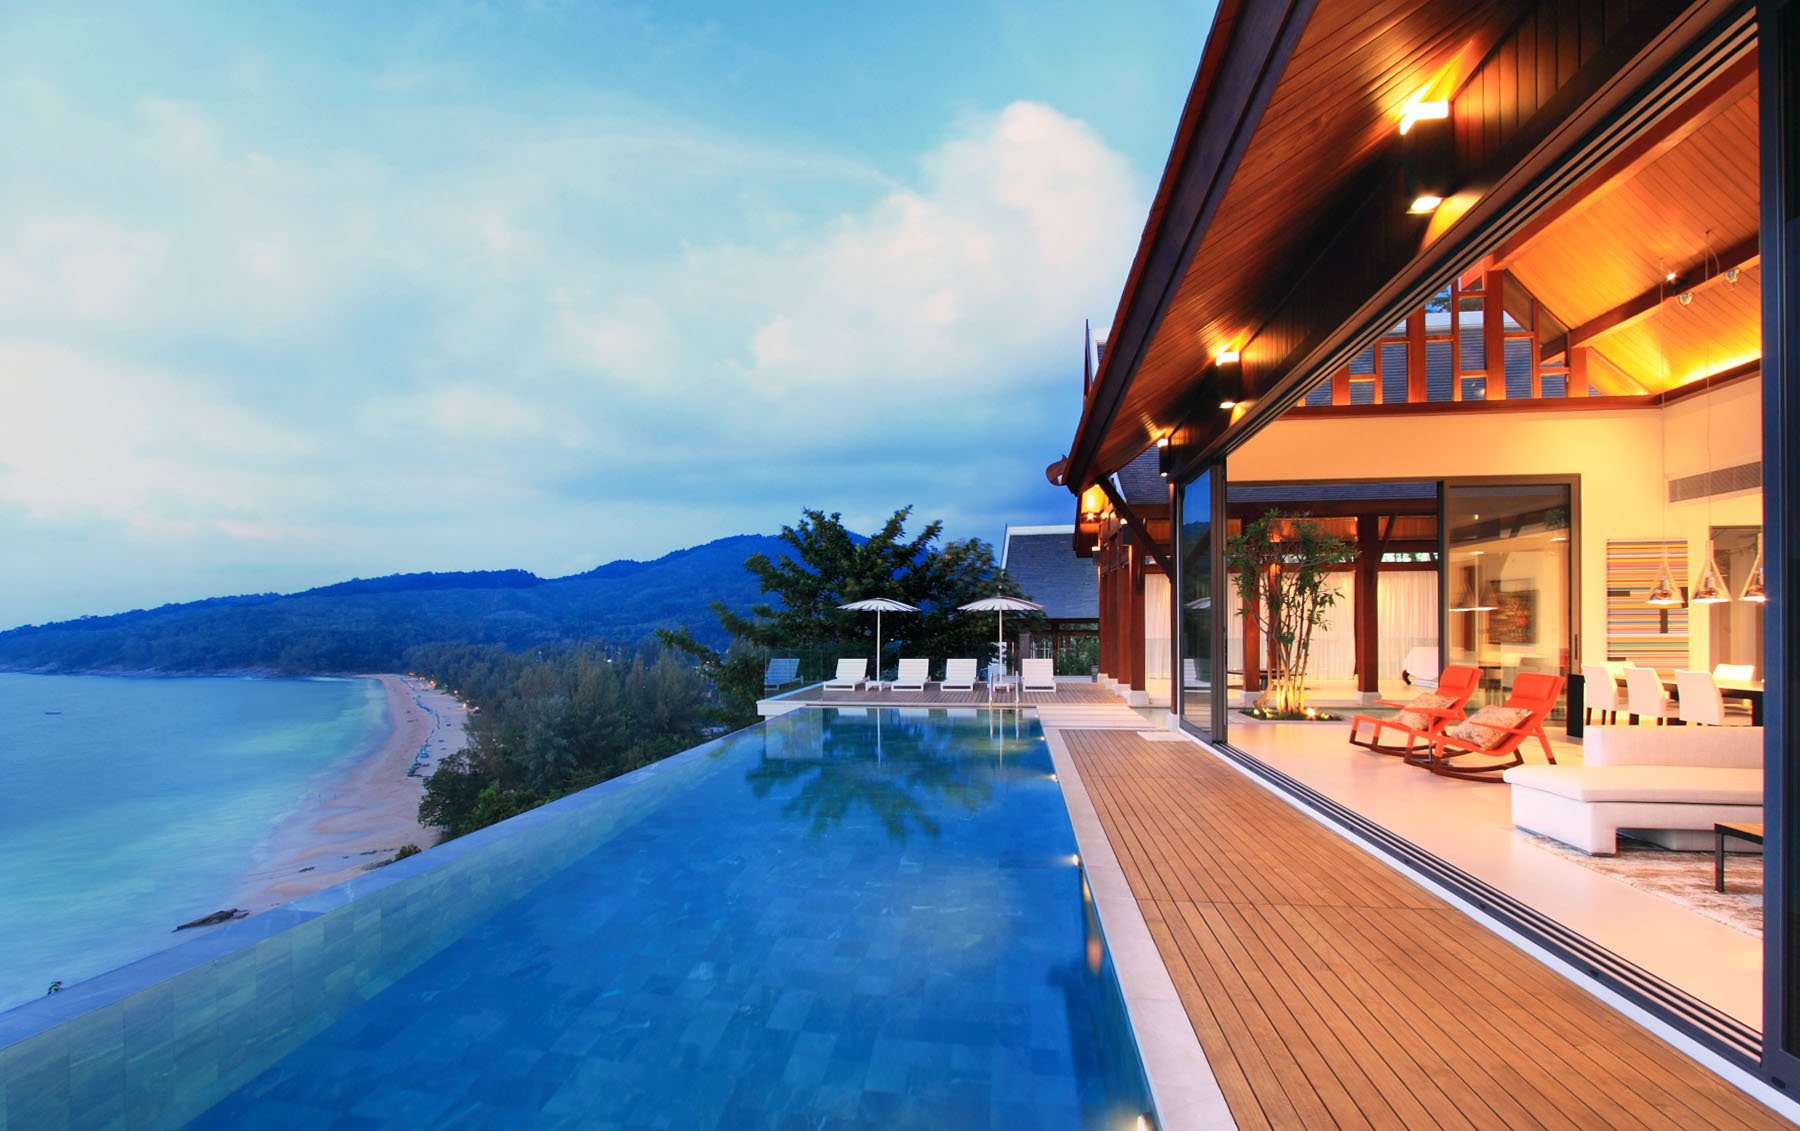 Mixed results for Phuket residential property sales - RealPhuket by Property Scout